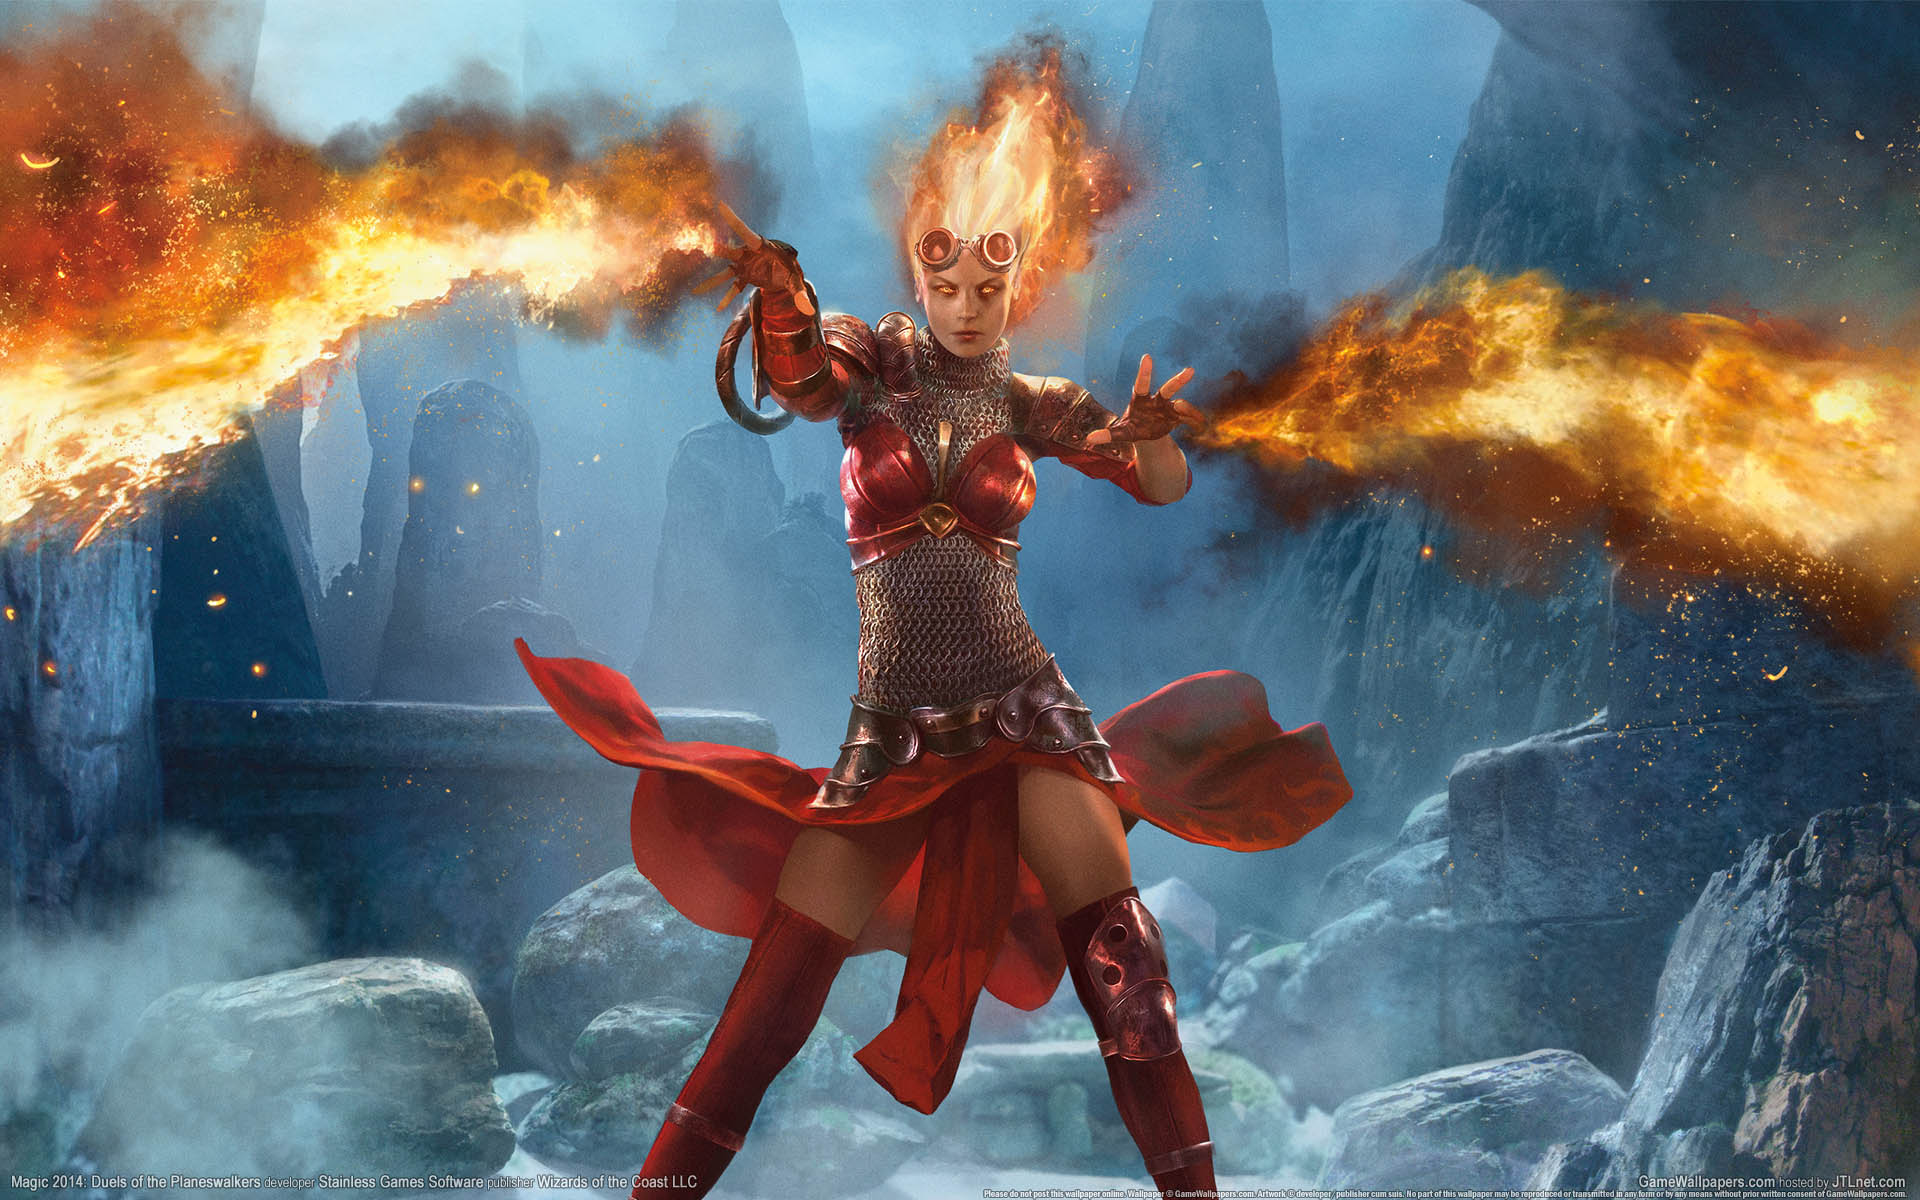 Magic 2014: Duels of the Planeswalkers achtergrond 01 1920x1200